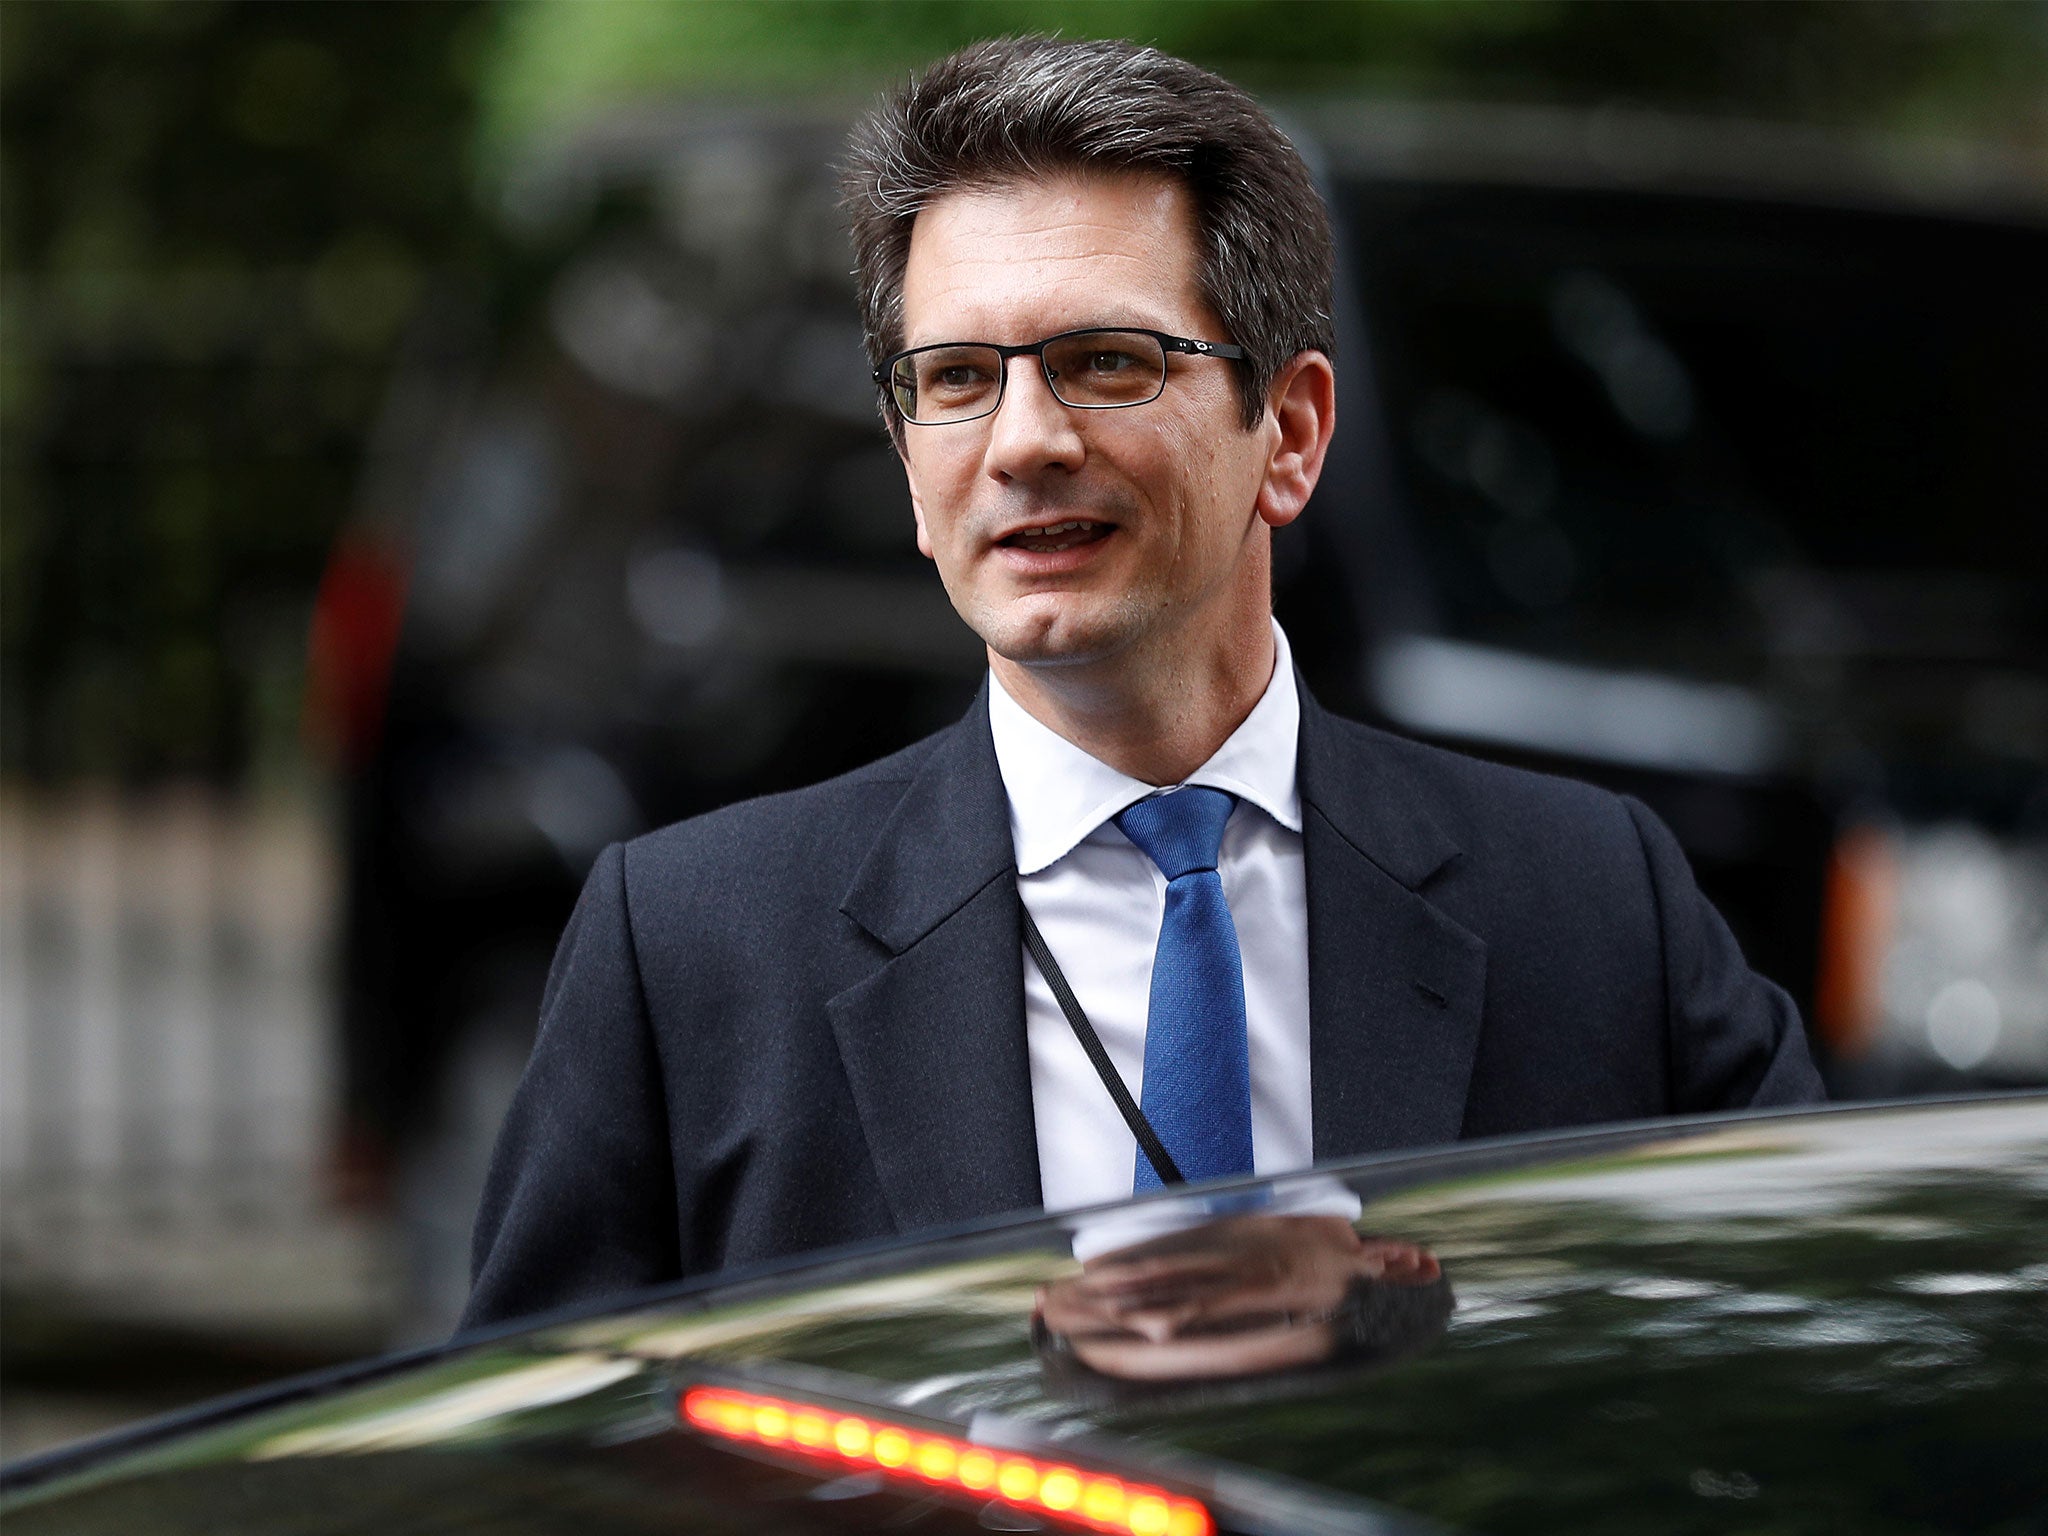 Steve Baker, a minister at the Department for Exiting the European Union, leaves Downing Street on 14 June 2017